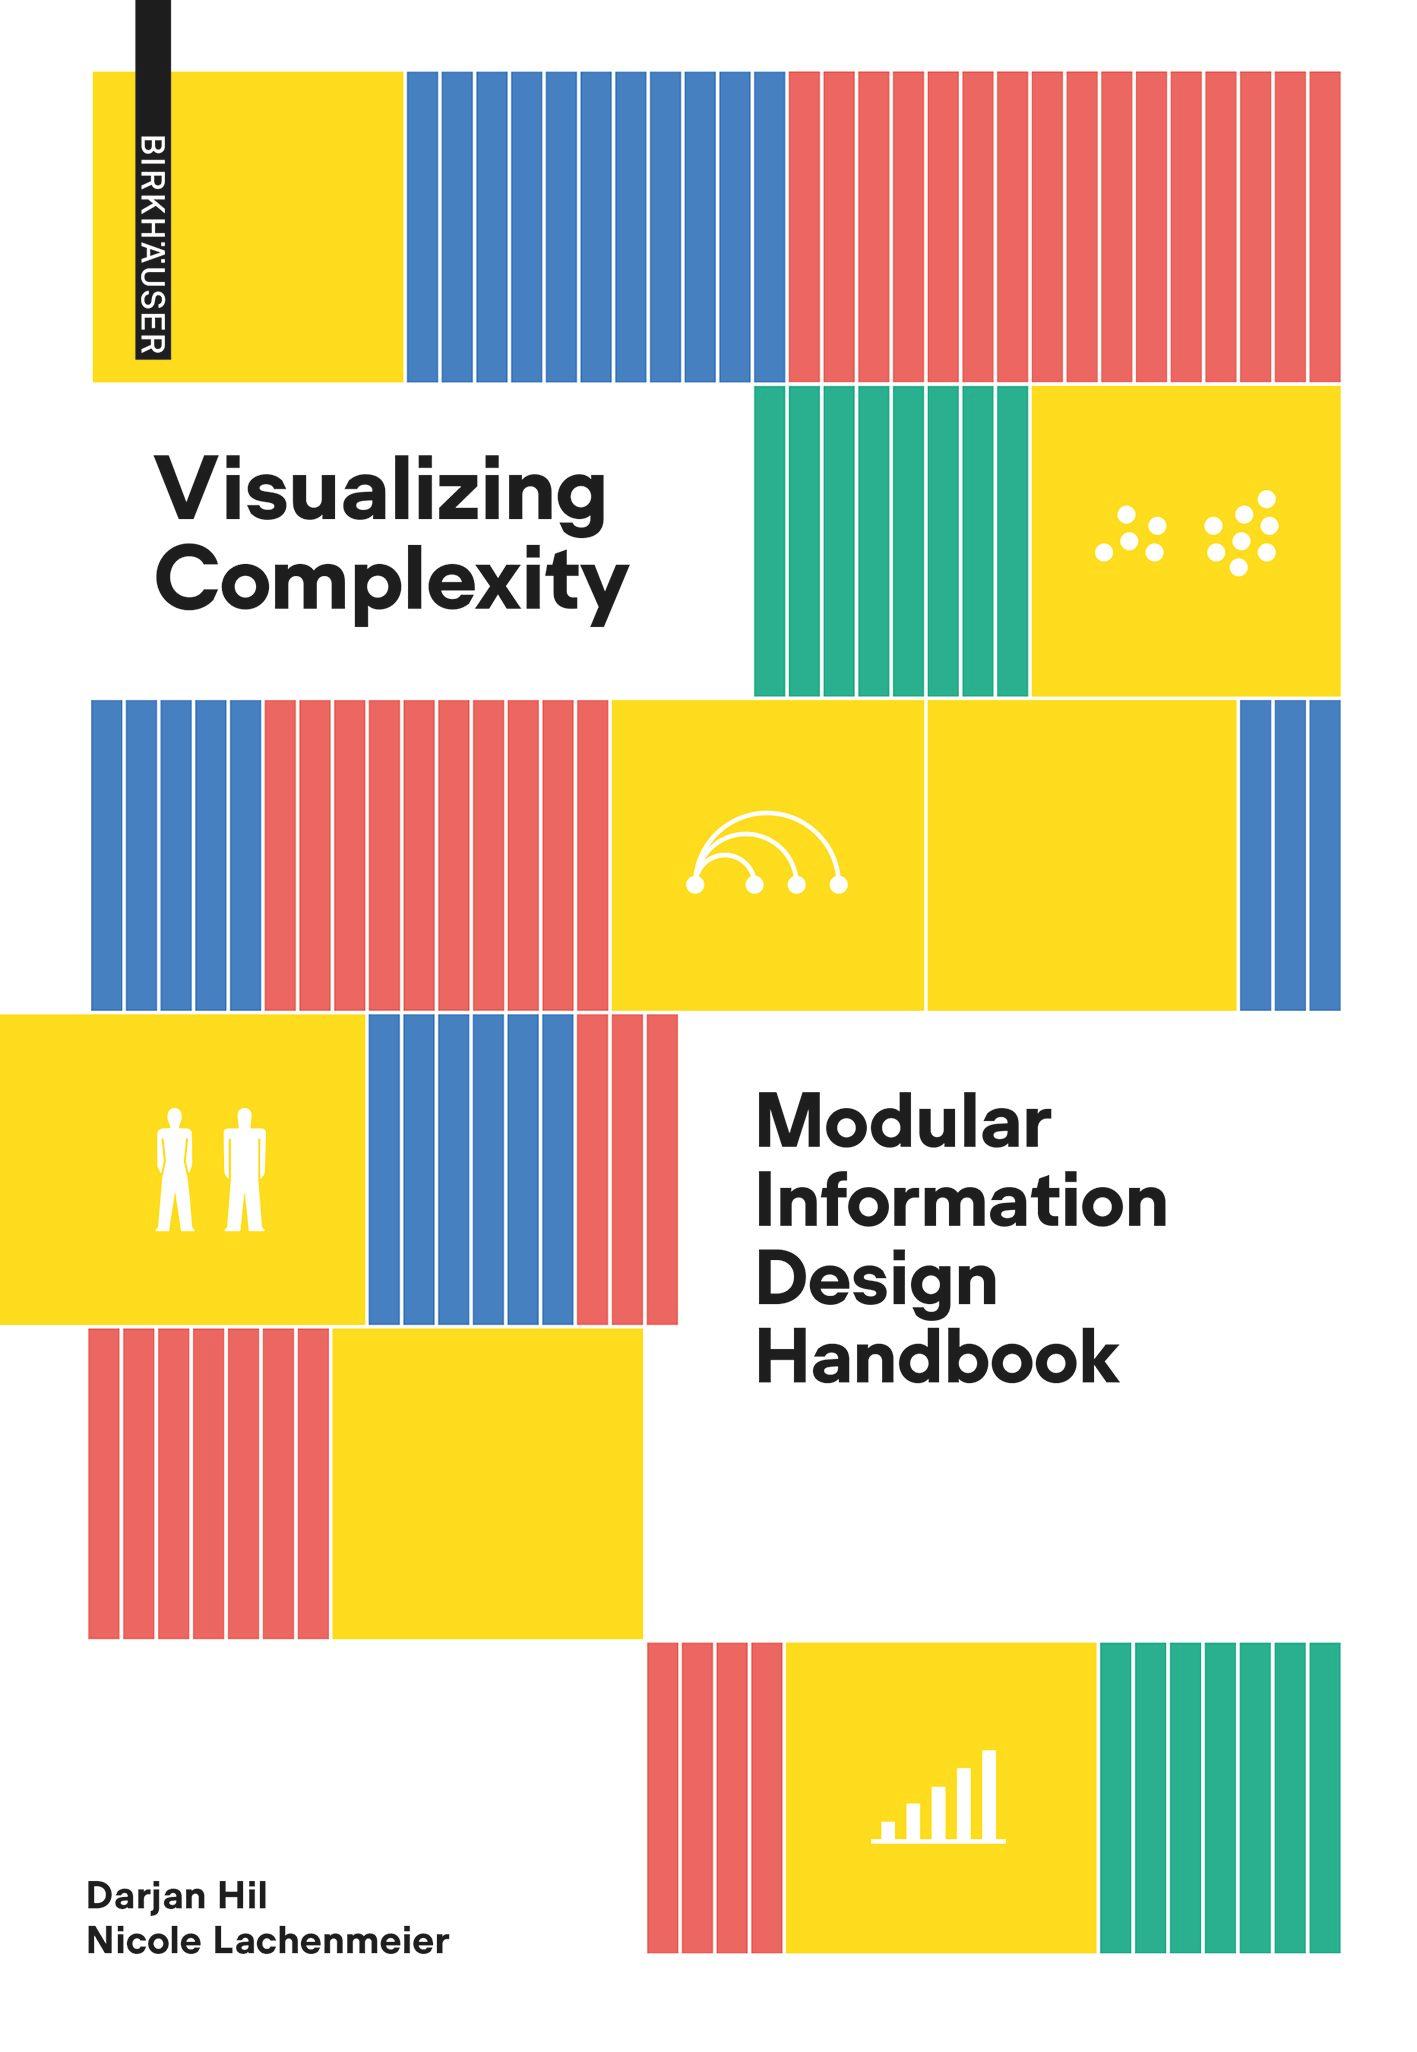 Visualizing Complexity's cover